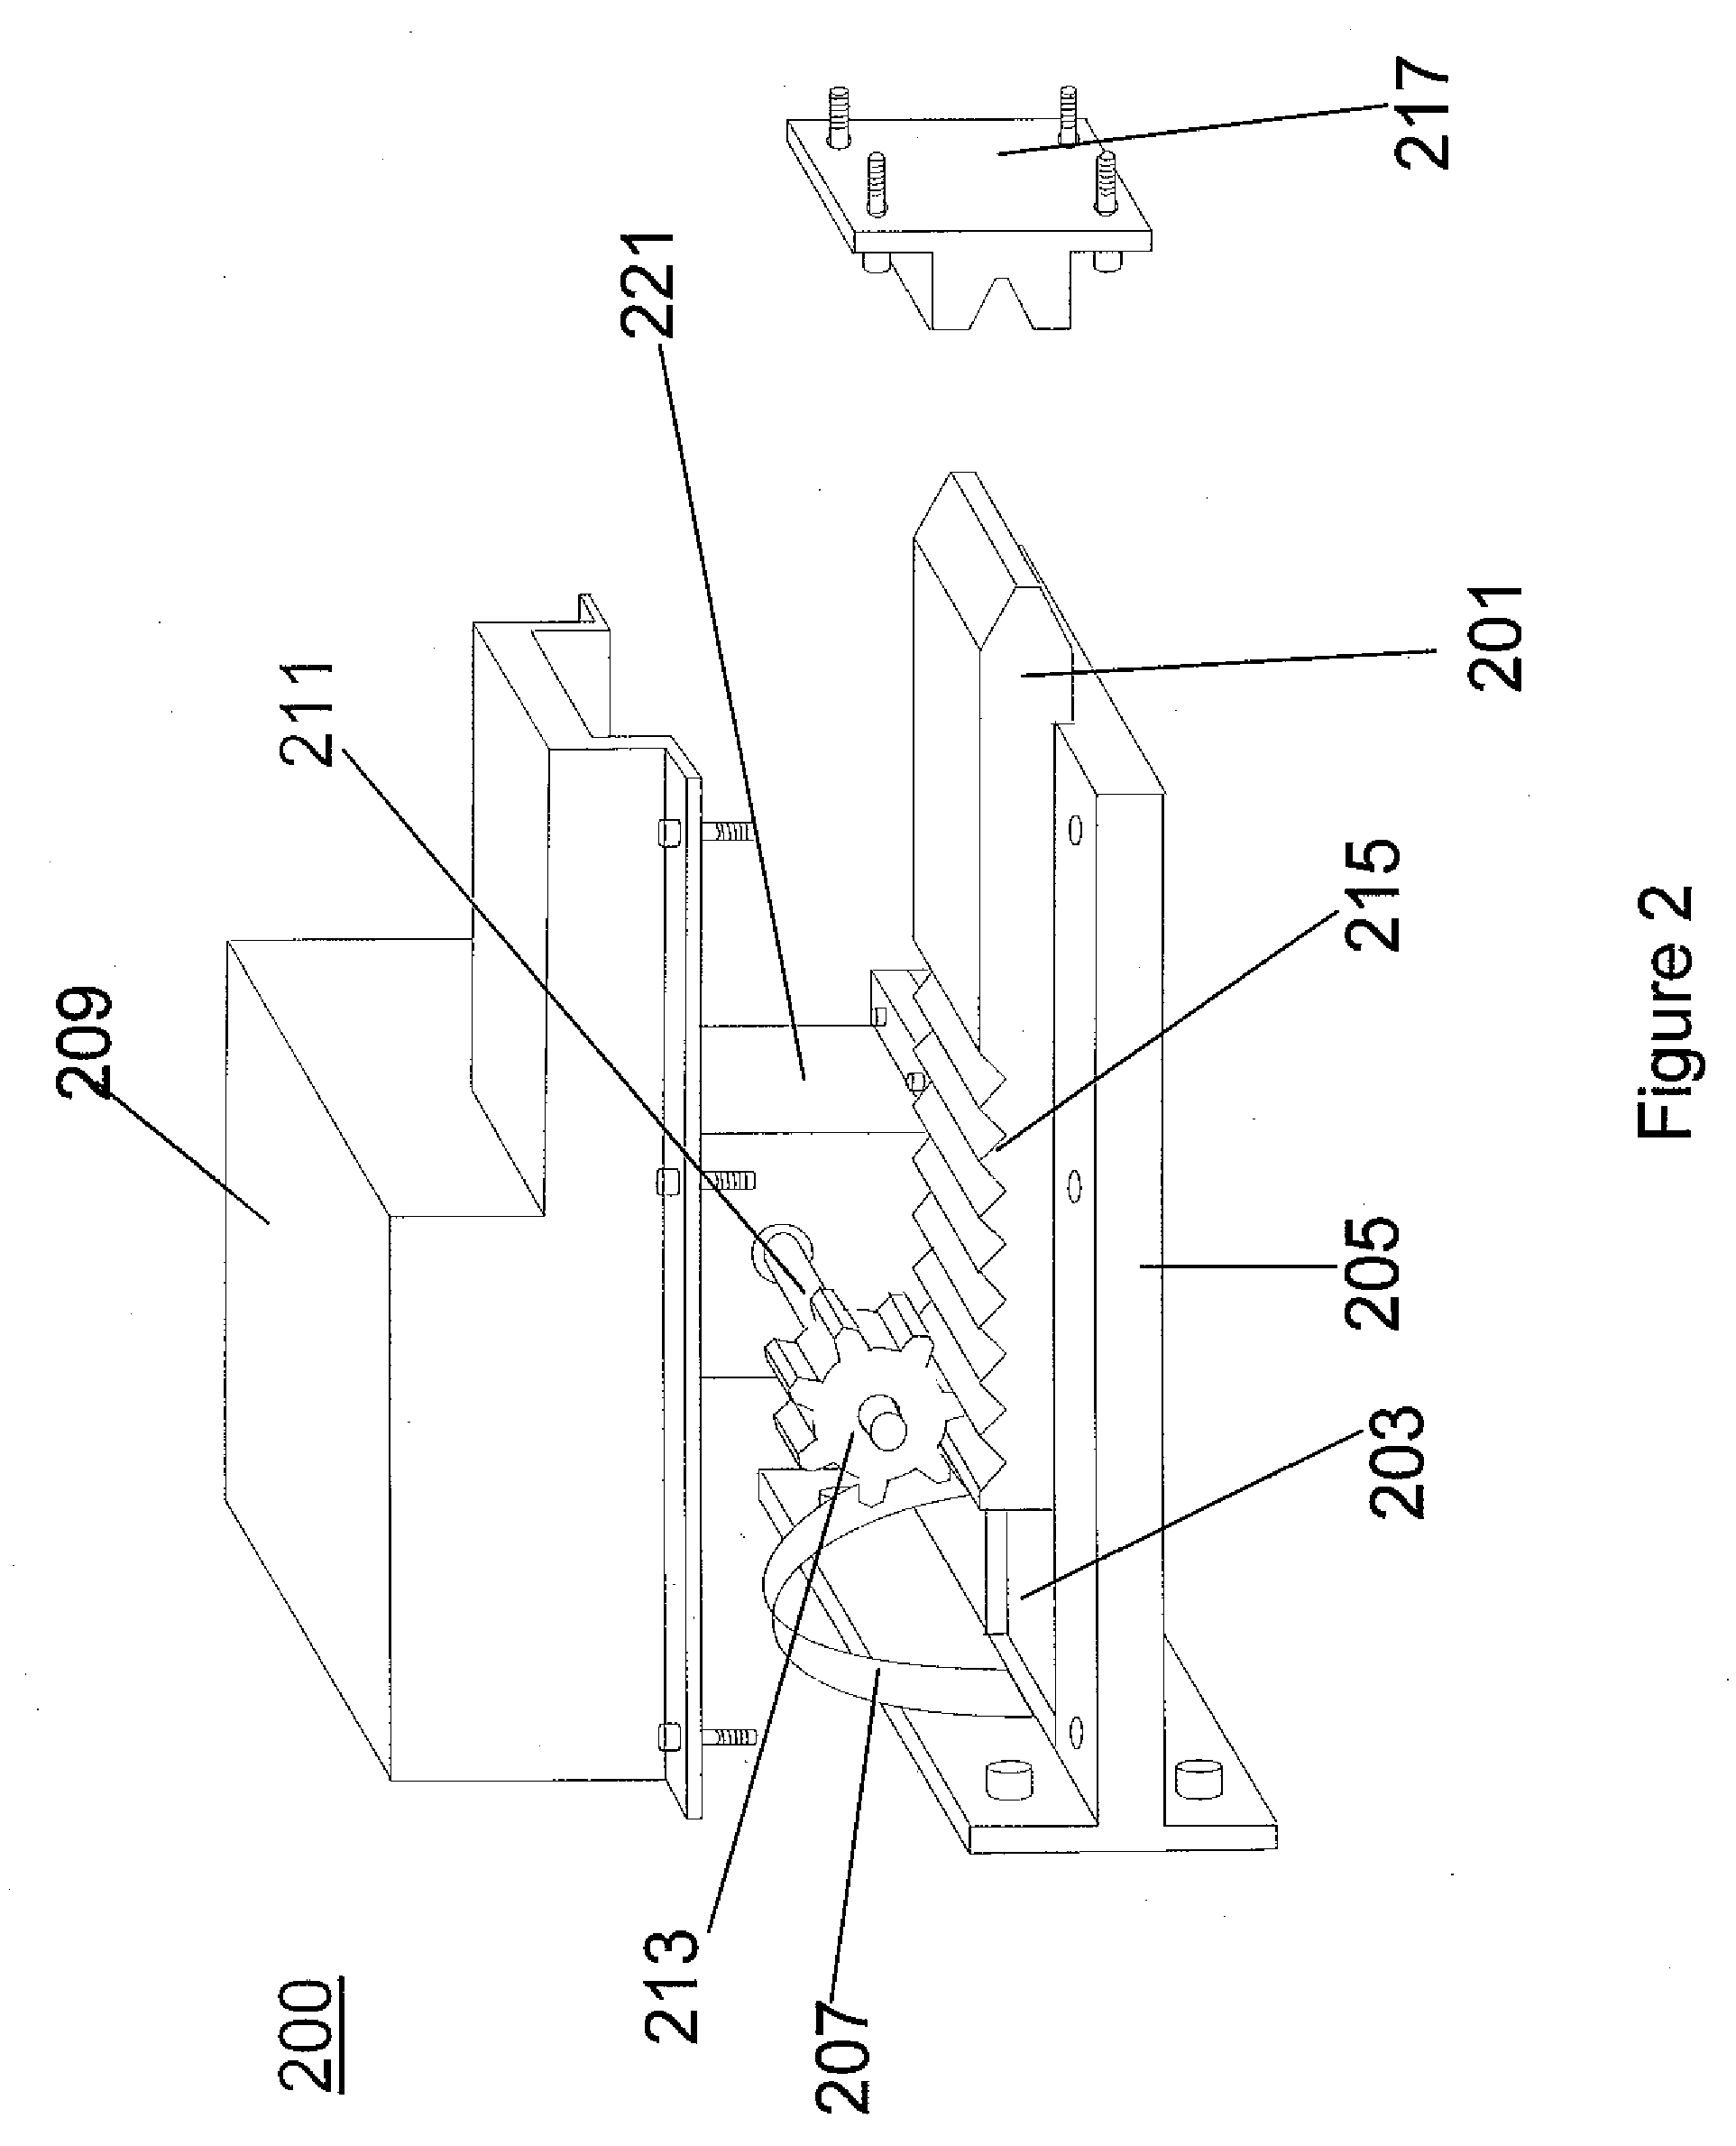 Mechanically actuated thermal switch